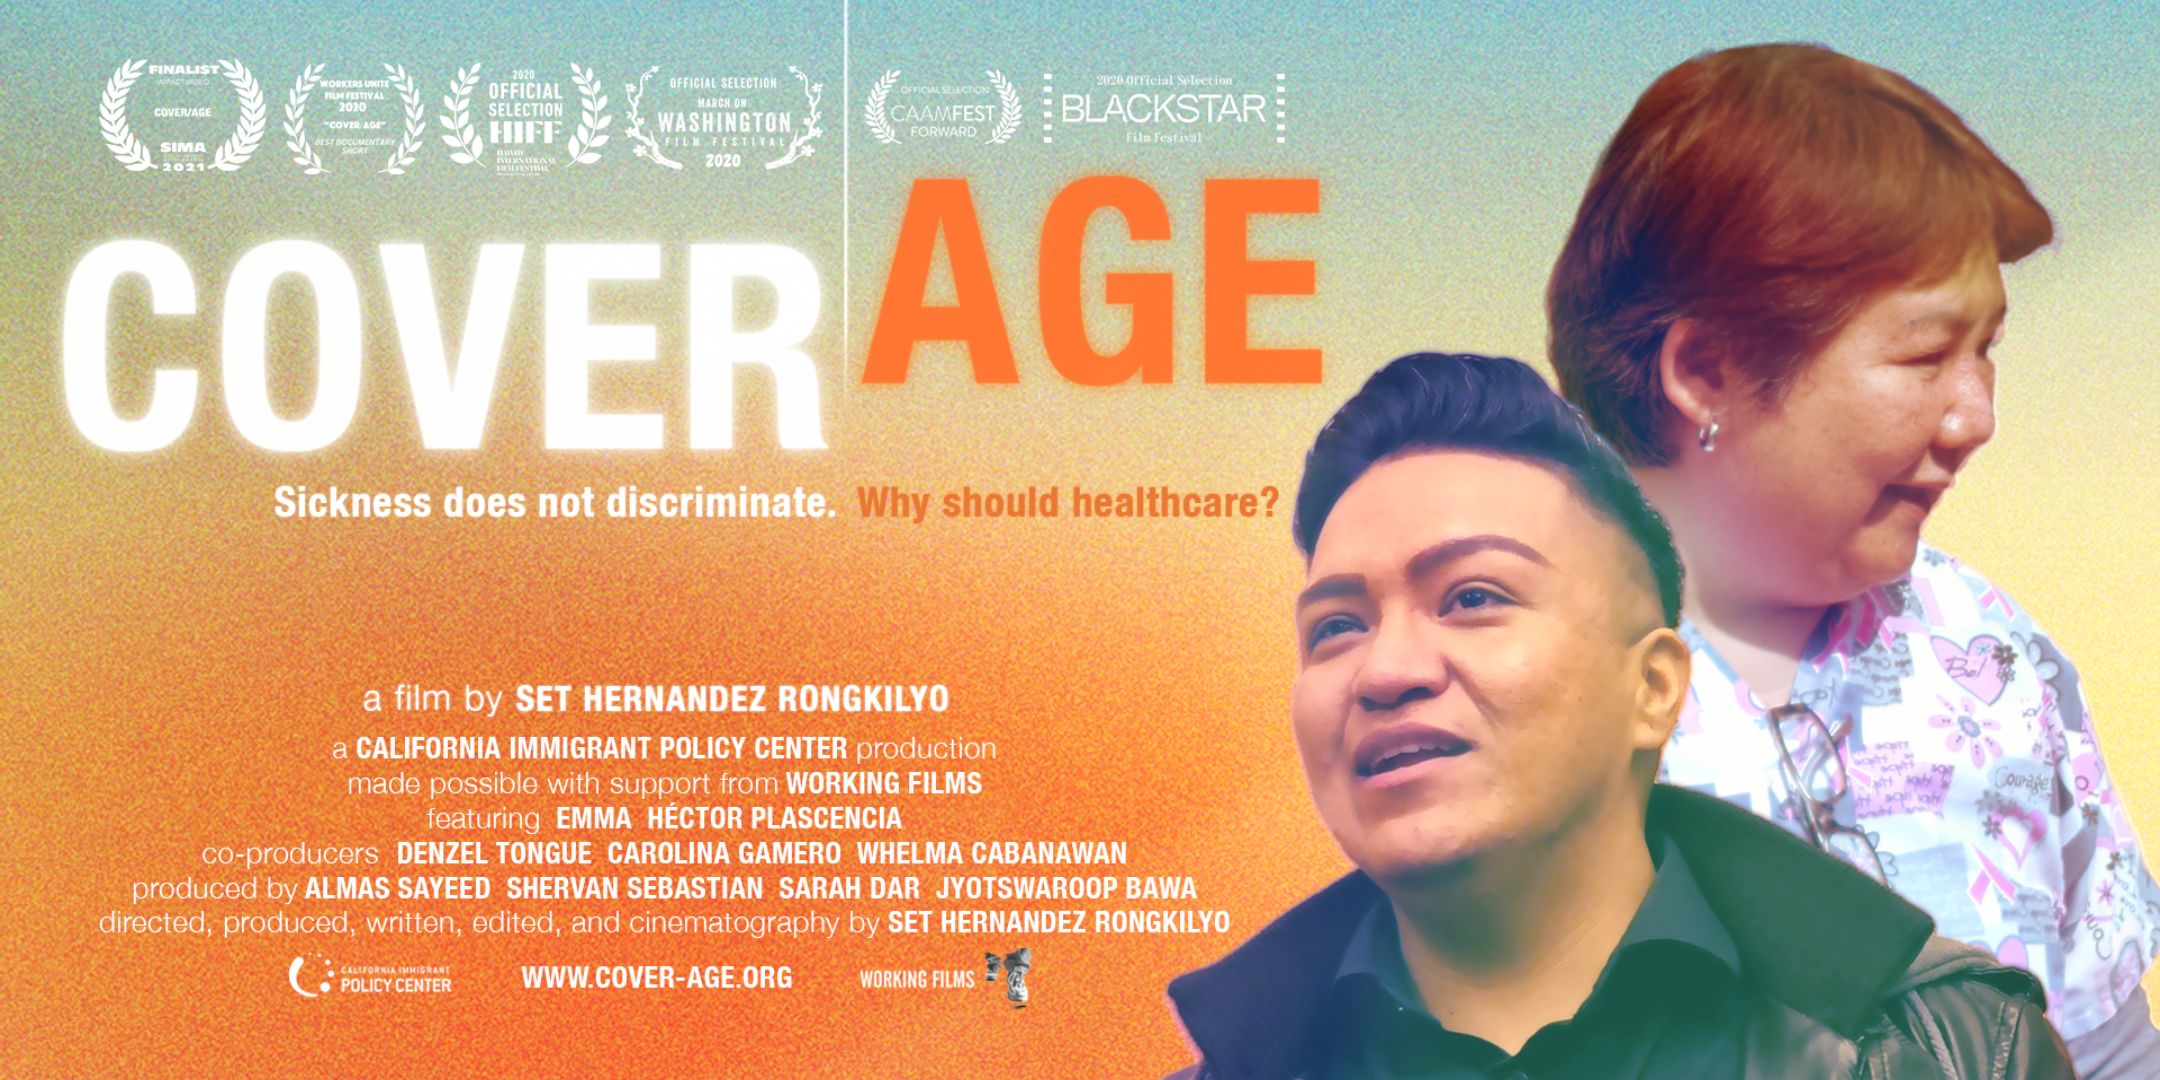 COVER/AGE documentary film by Set Hernandez Rongkilyo